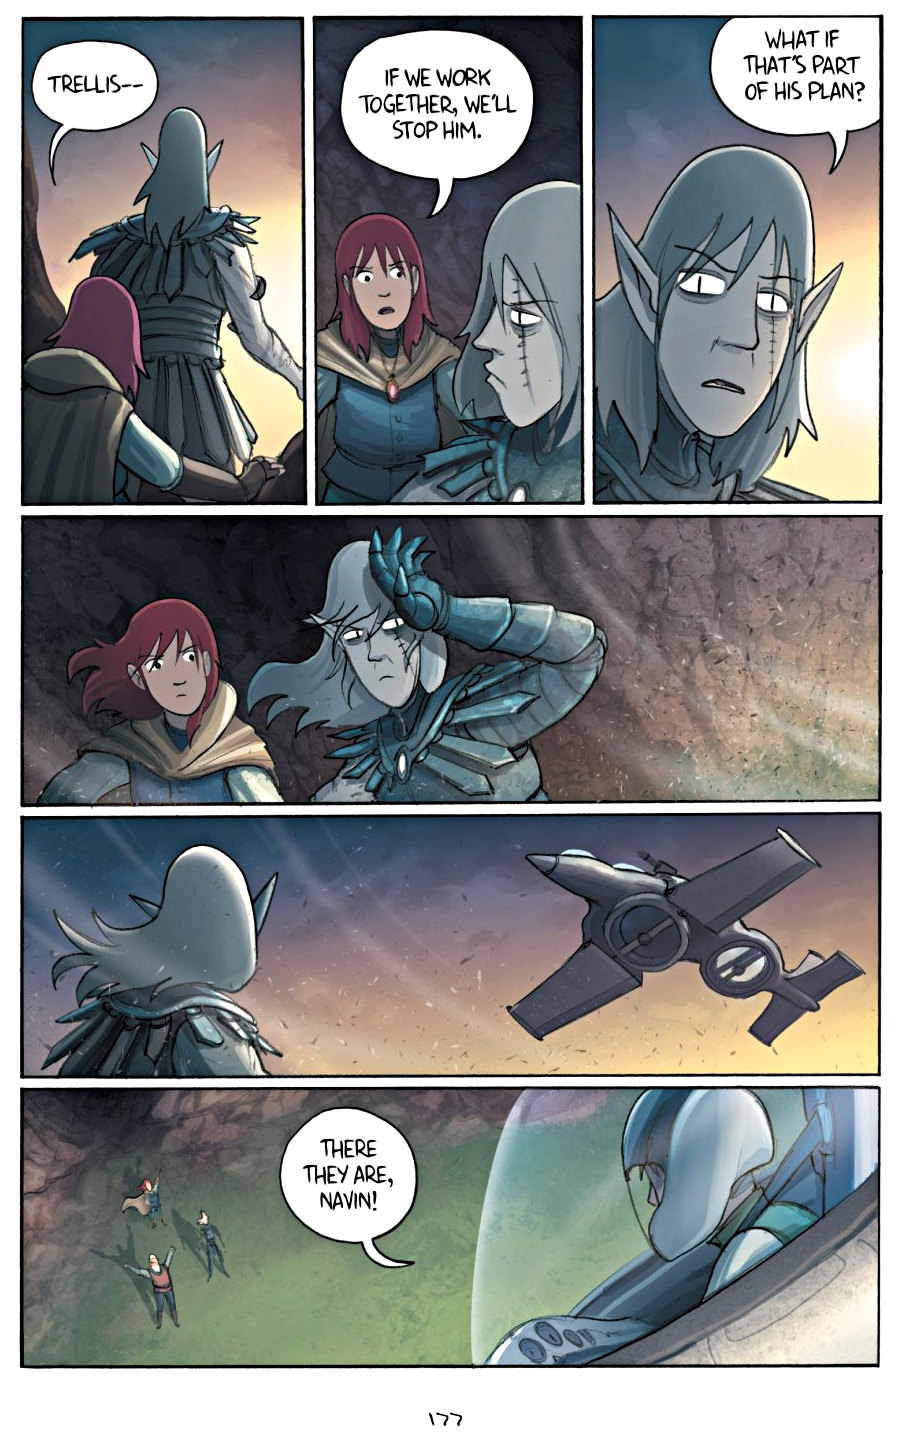 page 177 of amulet 5 prince of the elves graphic novel